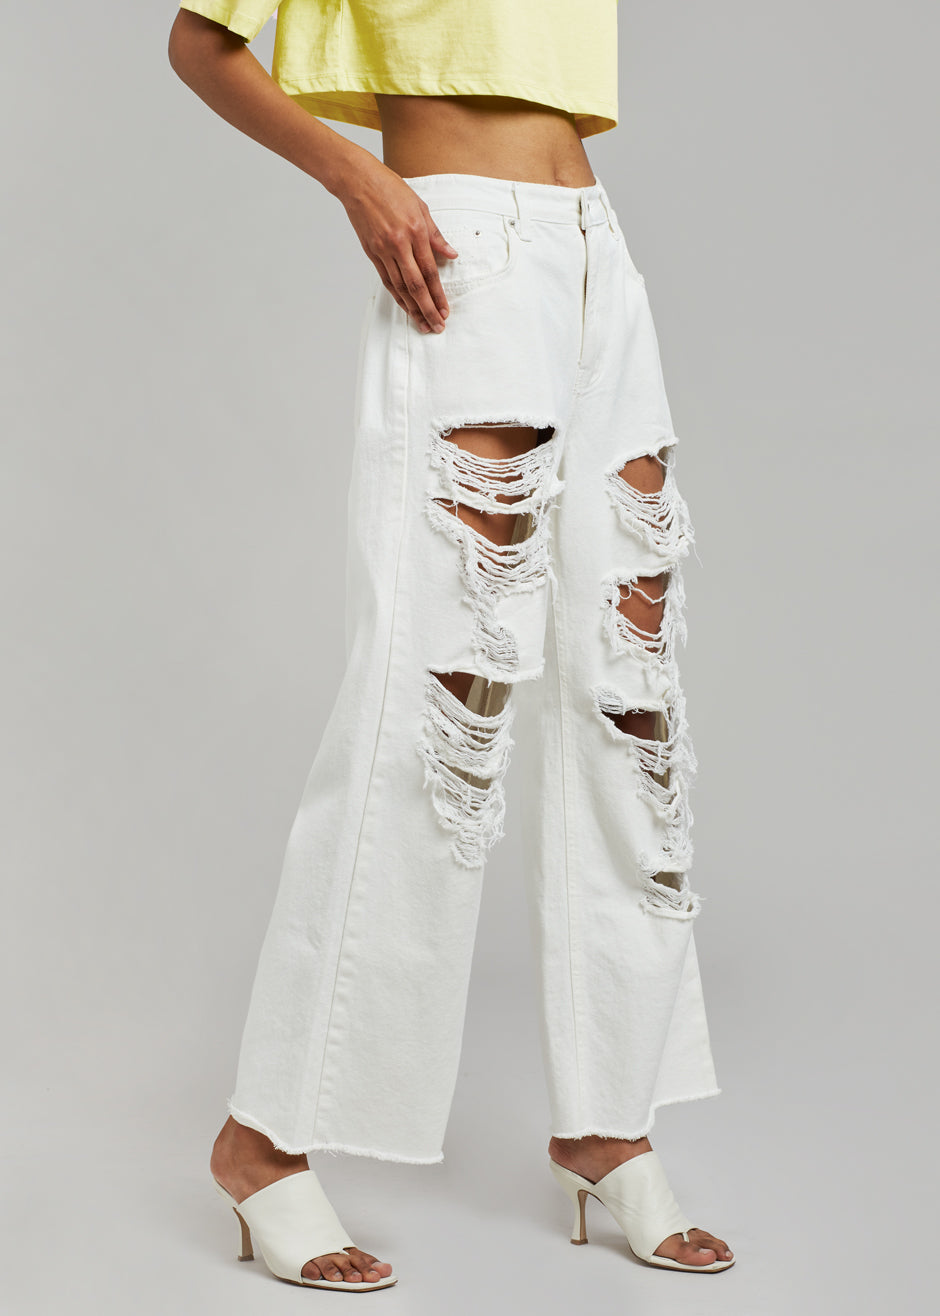 Tory Ripped Jeans - White - 4